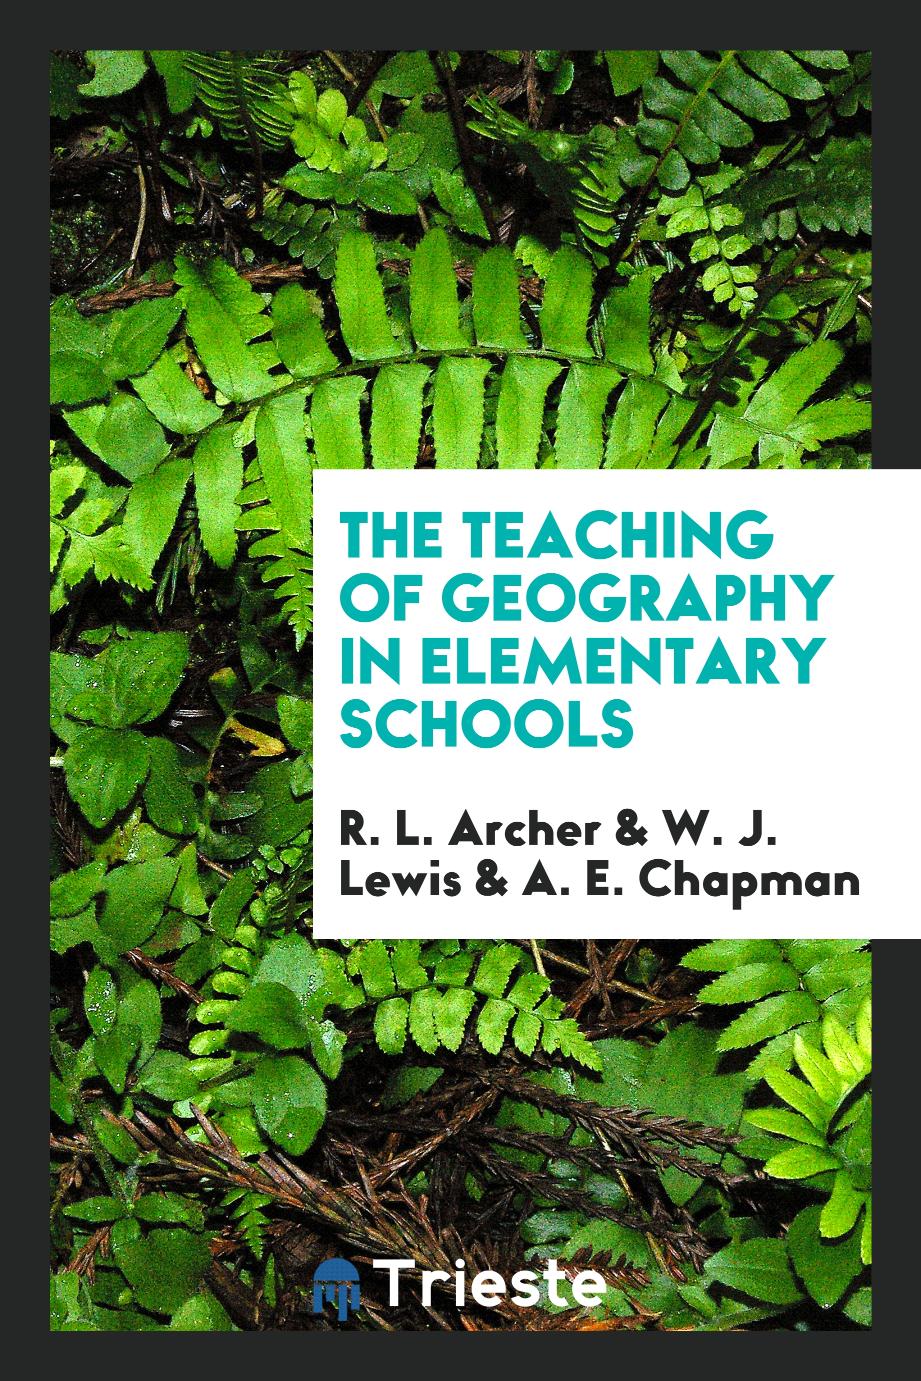 The teaching of geography in elementary schools